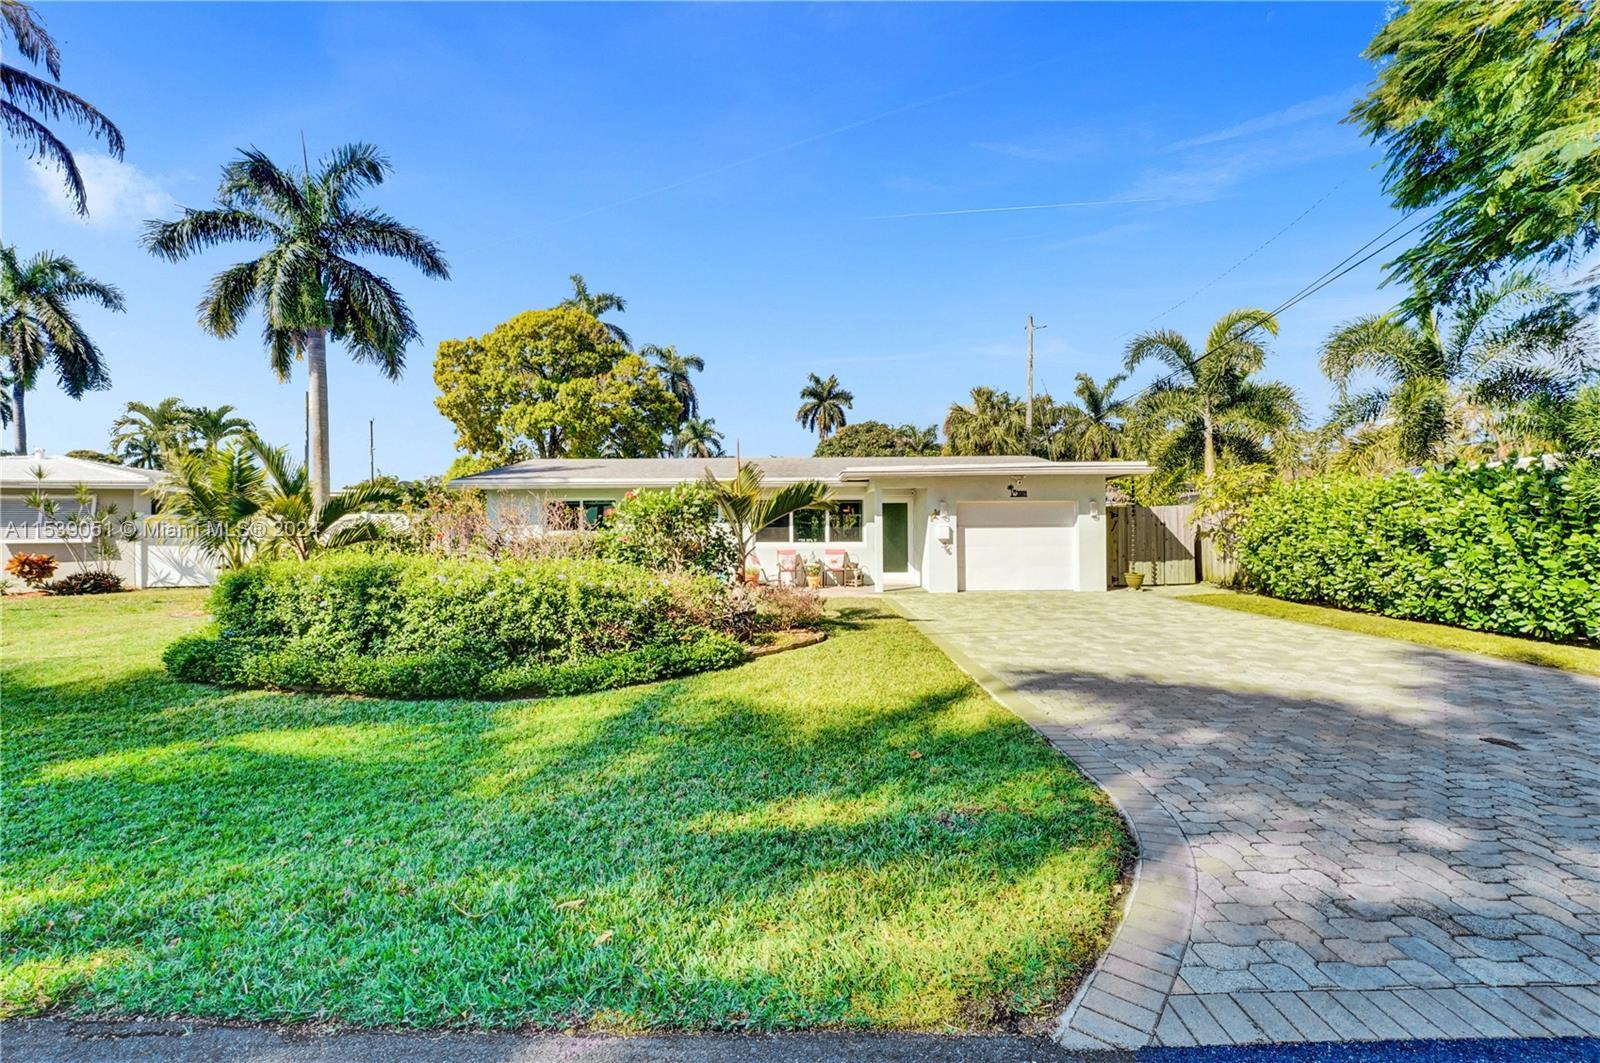 Exceptionally redone Wilton Manors pool home with 2 bedrooms 2 full baths + pool accessible den/offi